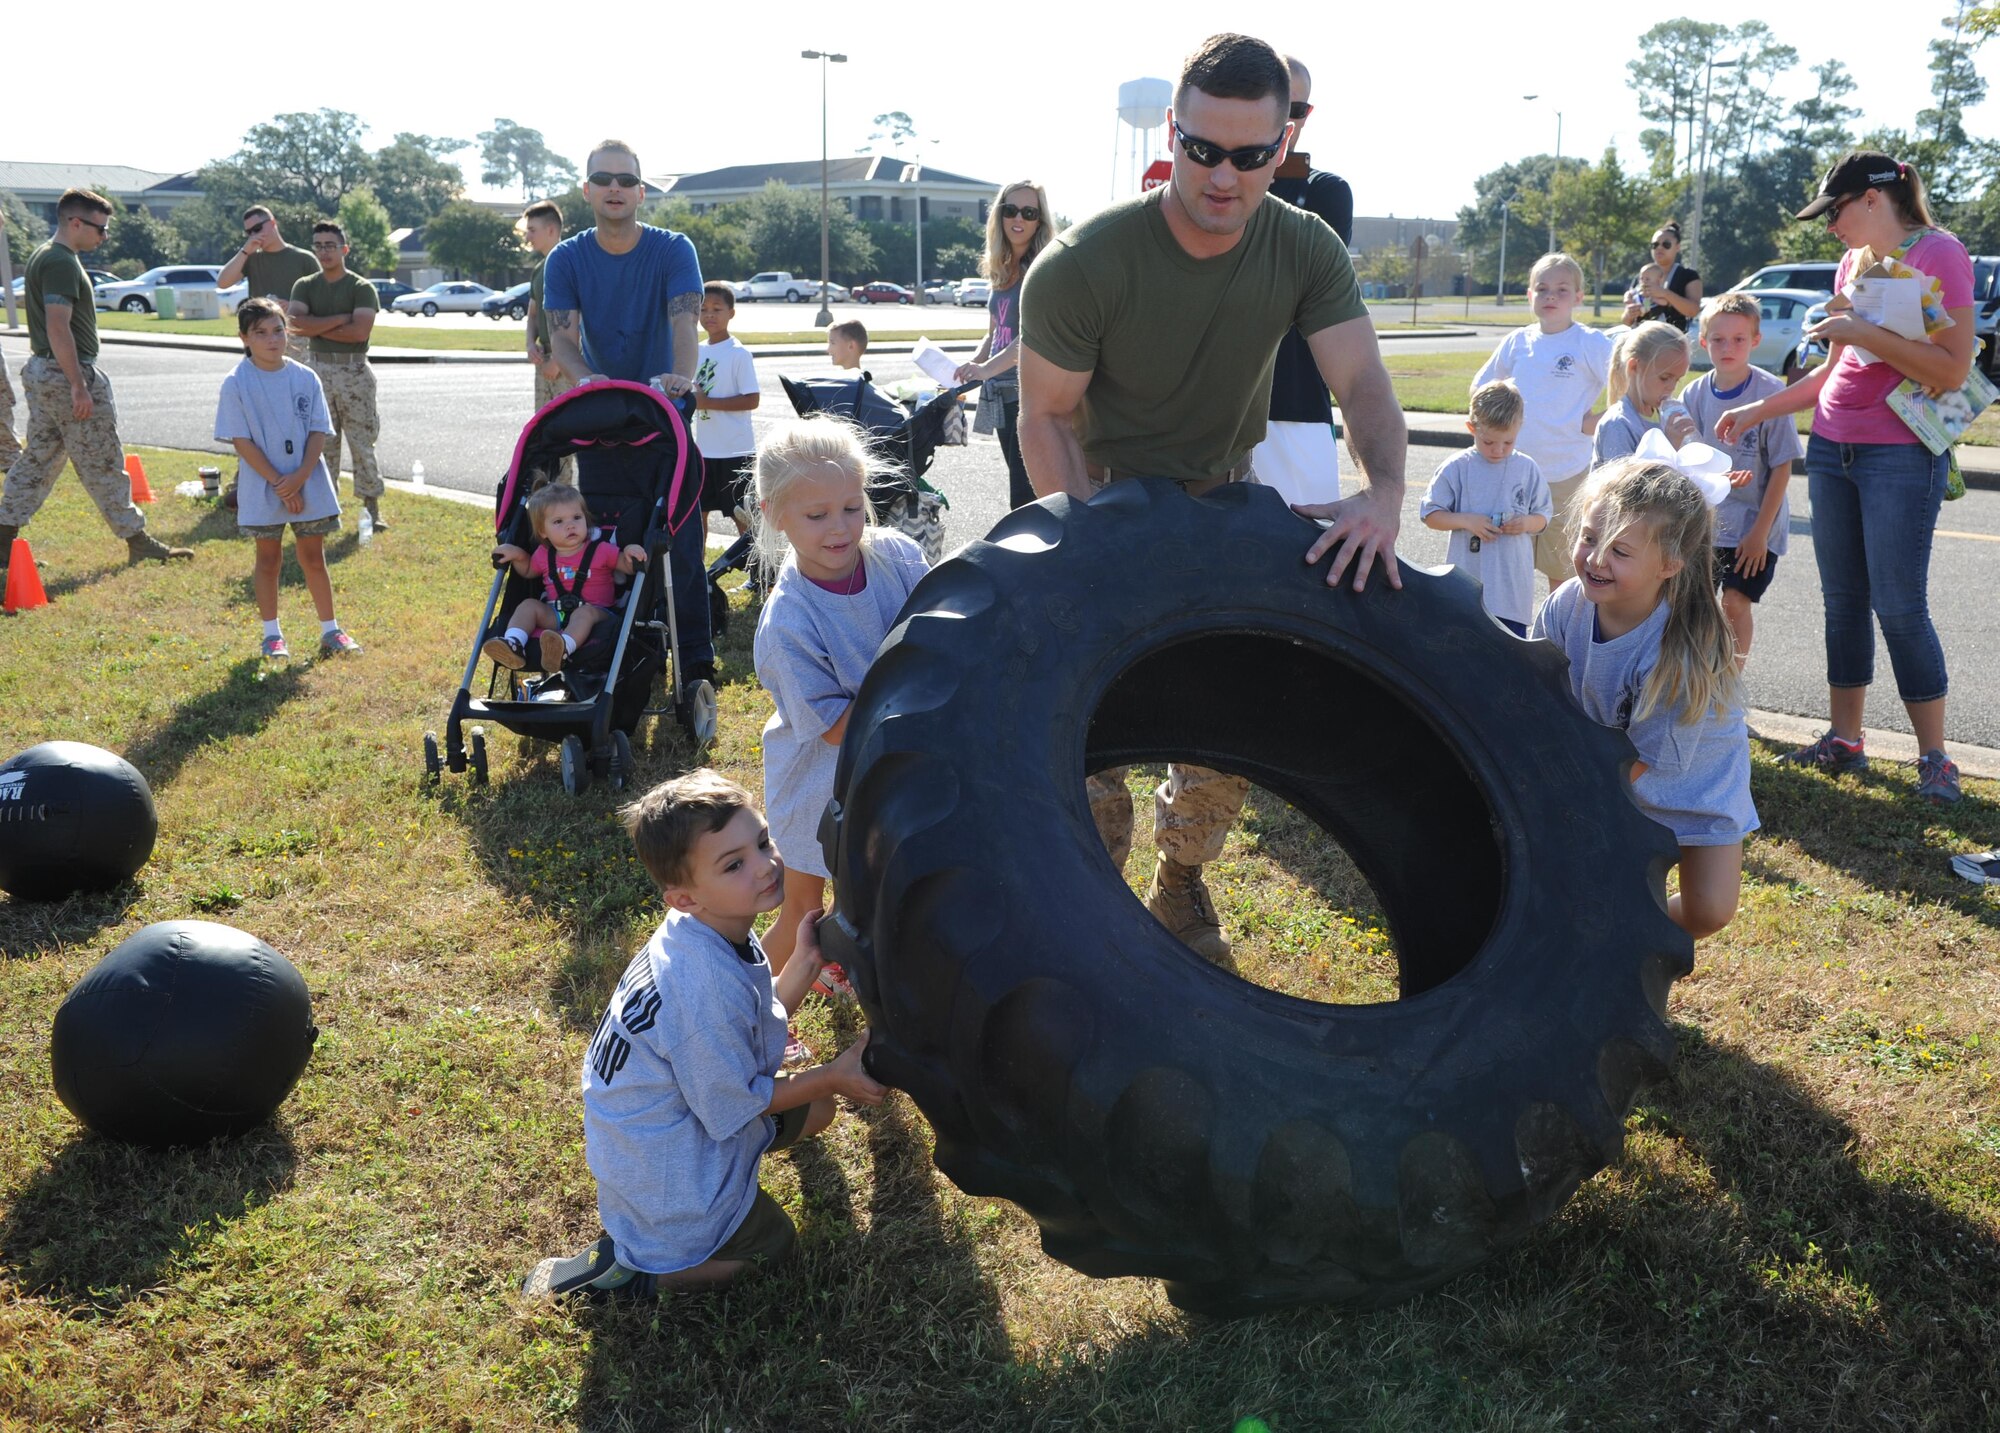 U.S. Marine Sgt. Paul Tutor, Keesler Marine Detachment instructor, helps Keesler children flip a tire during Operation Hero Oct. 15, 2016, on Keesler Air Force Base, Miss. The event was designed to help children better understand what their parents do when they deploy. (U.S. Air Force photo by Kemberly Groue/Released)